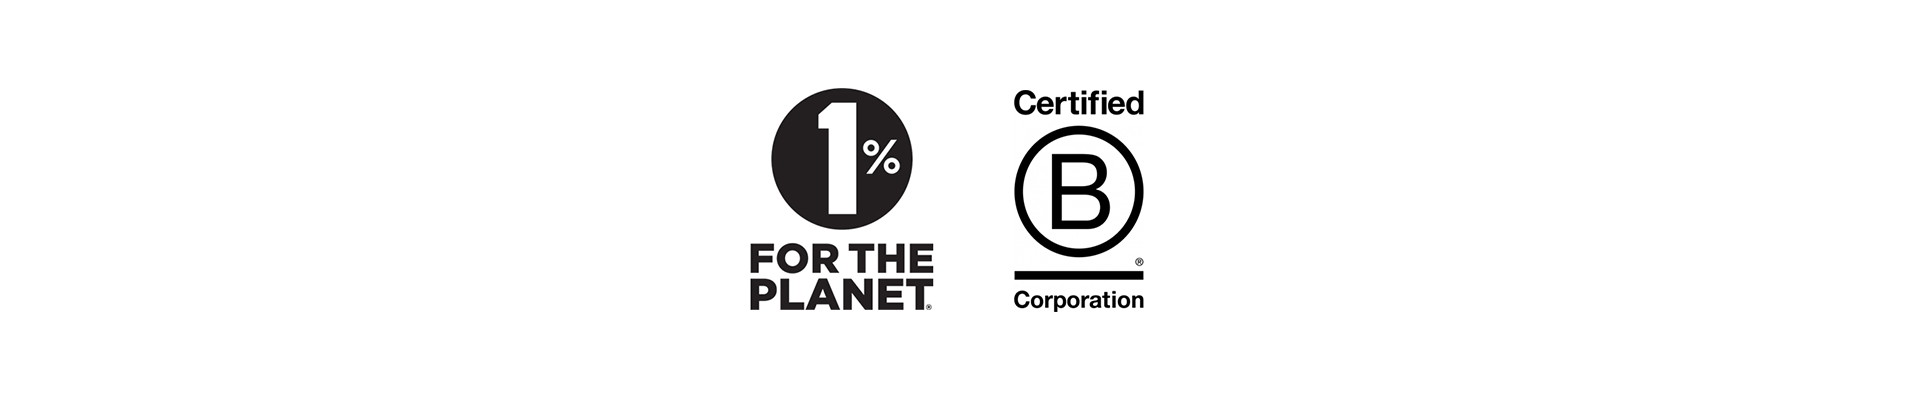 B Corp and 1 % for the planet logos